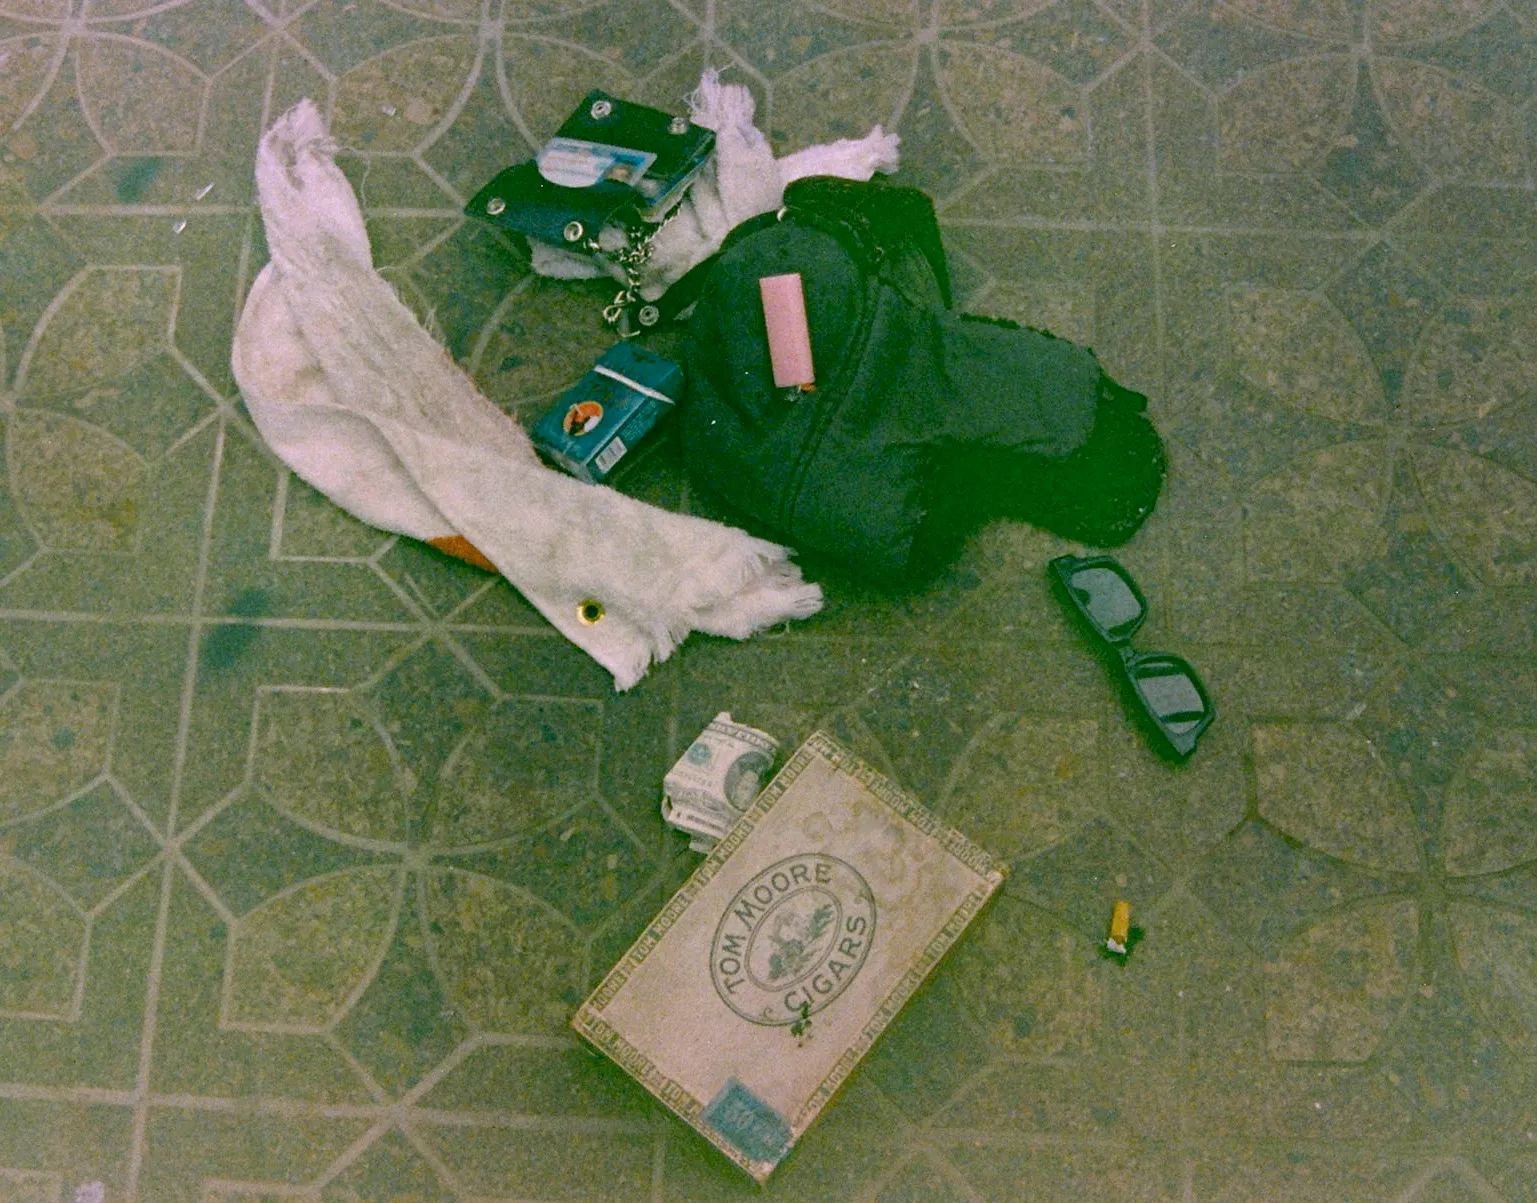 Items collected from Kurt Cobain death scene